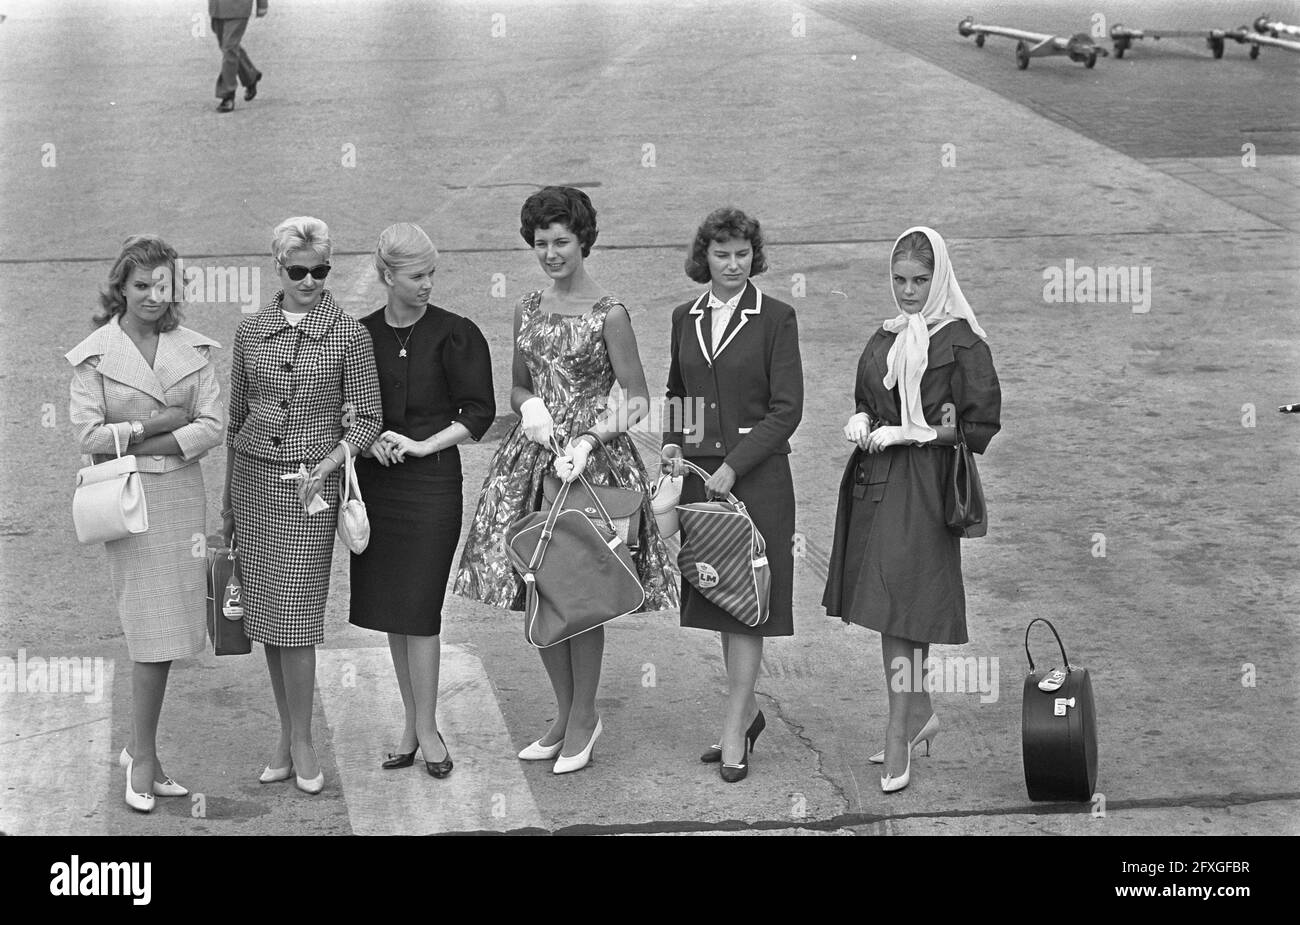 Departure to Palermo of the beauty queens for the Miss Europe elections. From left to right: miss Belgium, miss Luxembourg, miss Denmark, miss Holland (Peggy Erwich), miss Iceland and miss [TEXT NOT COMPLETE ], 29 July 1959, beauty pageants, women, The Netherlands, 20th century press agency photo, news to remember, documentary, historic photography 1945-1990, visual stories, human history of the Twentieth Century, capturing moments in time Stock Photo